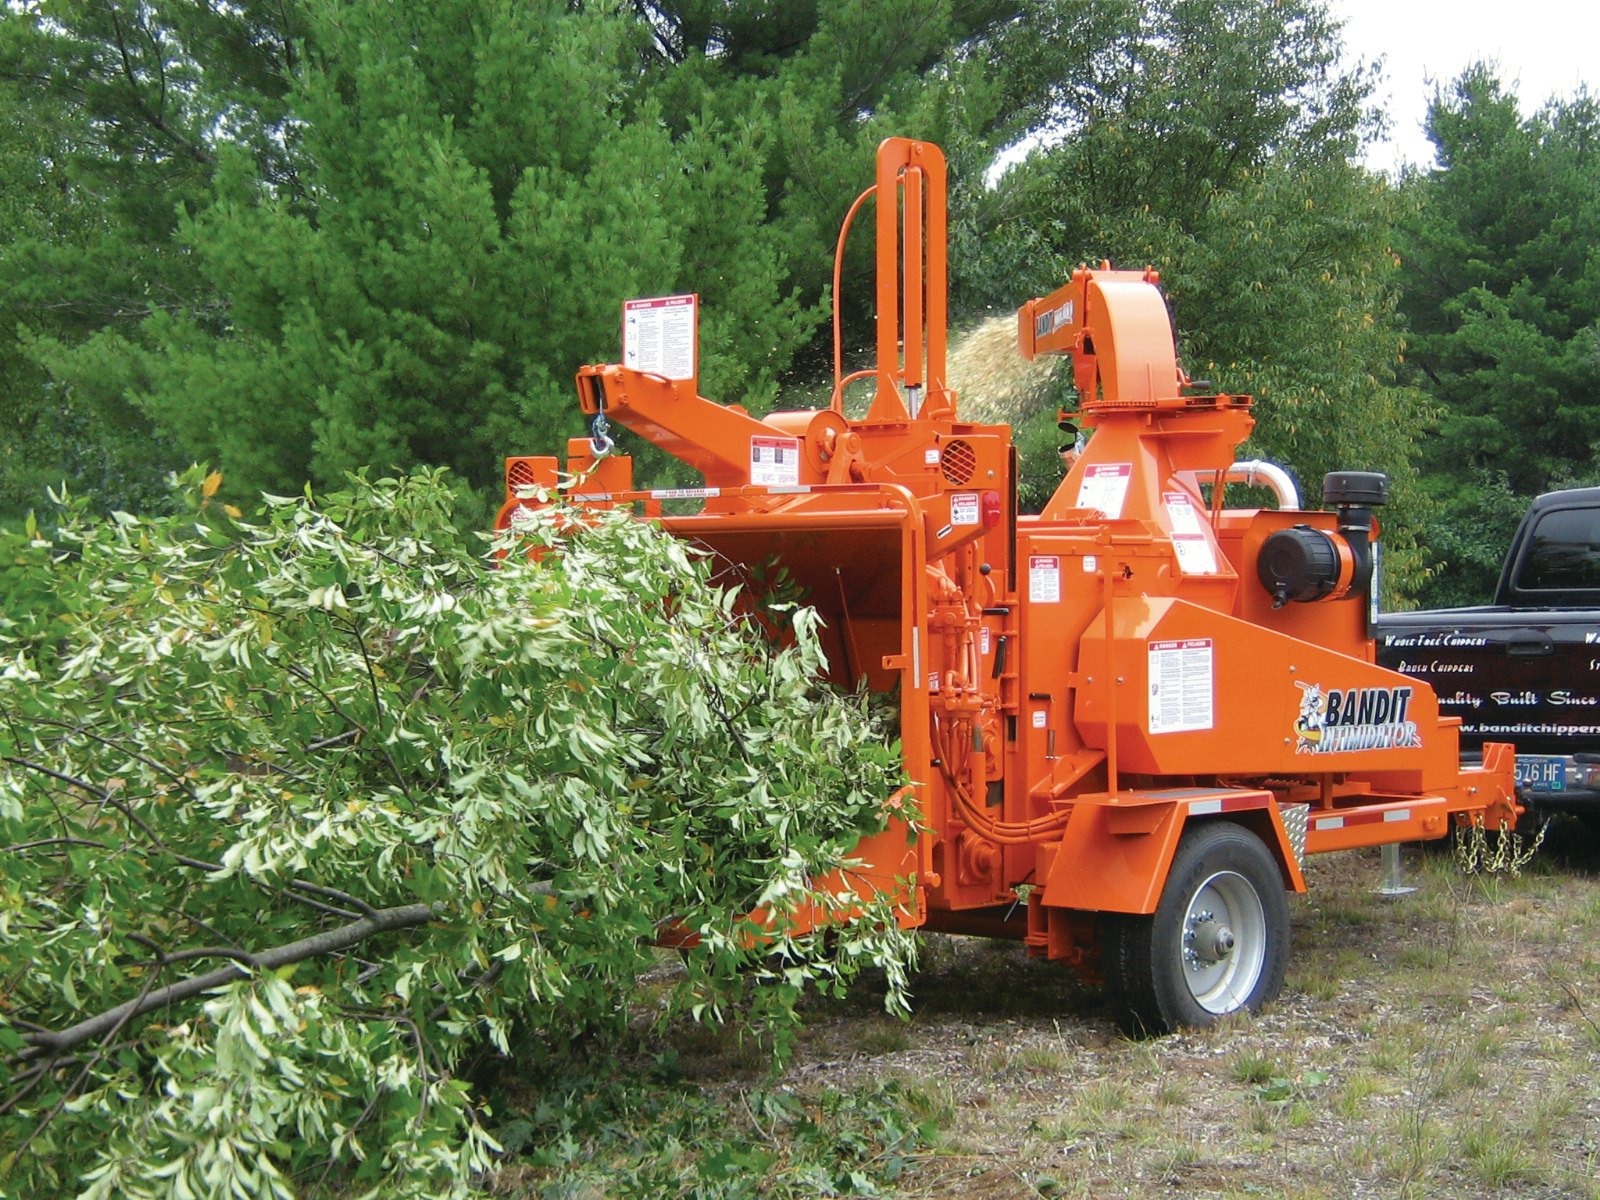 Model 1890xp Brush Chipper From Bandit Industries Inc For Construction Pros